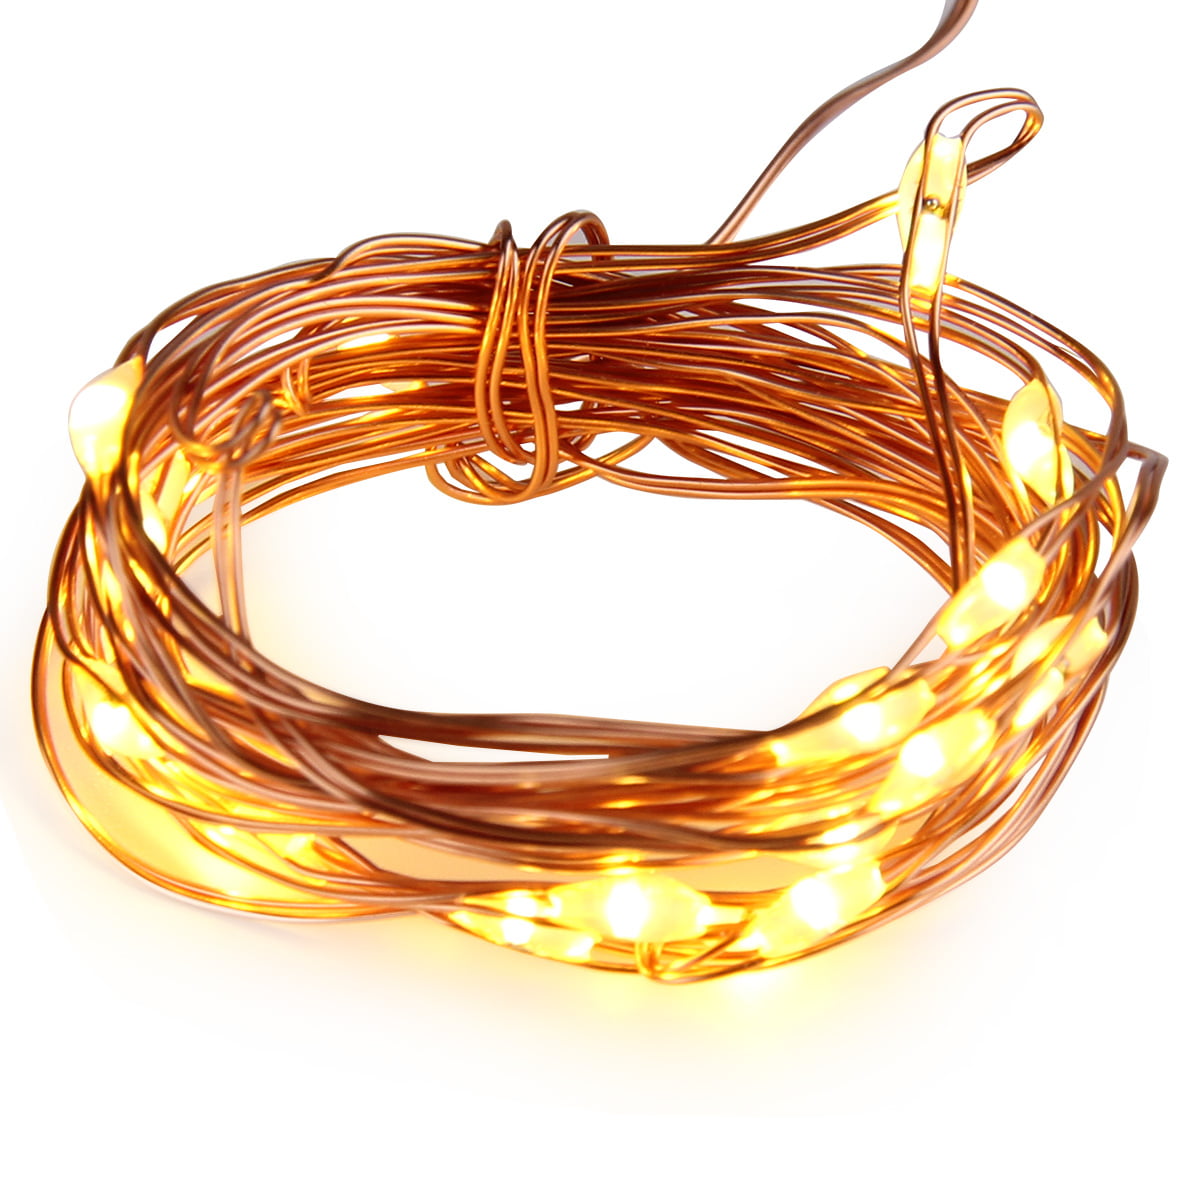 SUPERNIGHT® 2m 20Leds 7ft LED Starry Lights Copper Wire String Fairy Lamp 